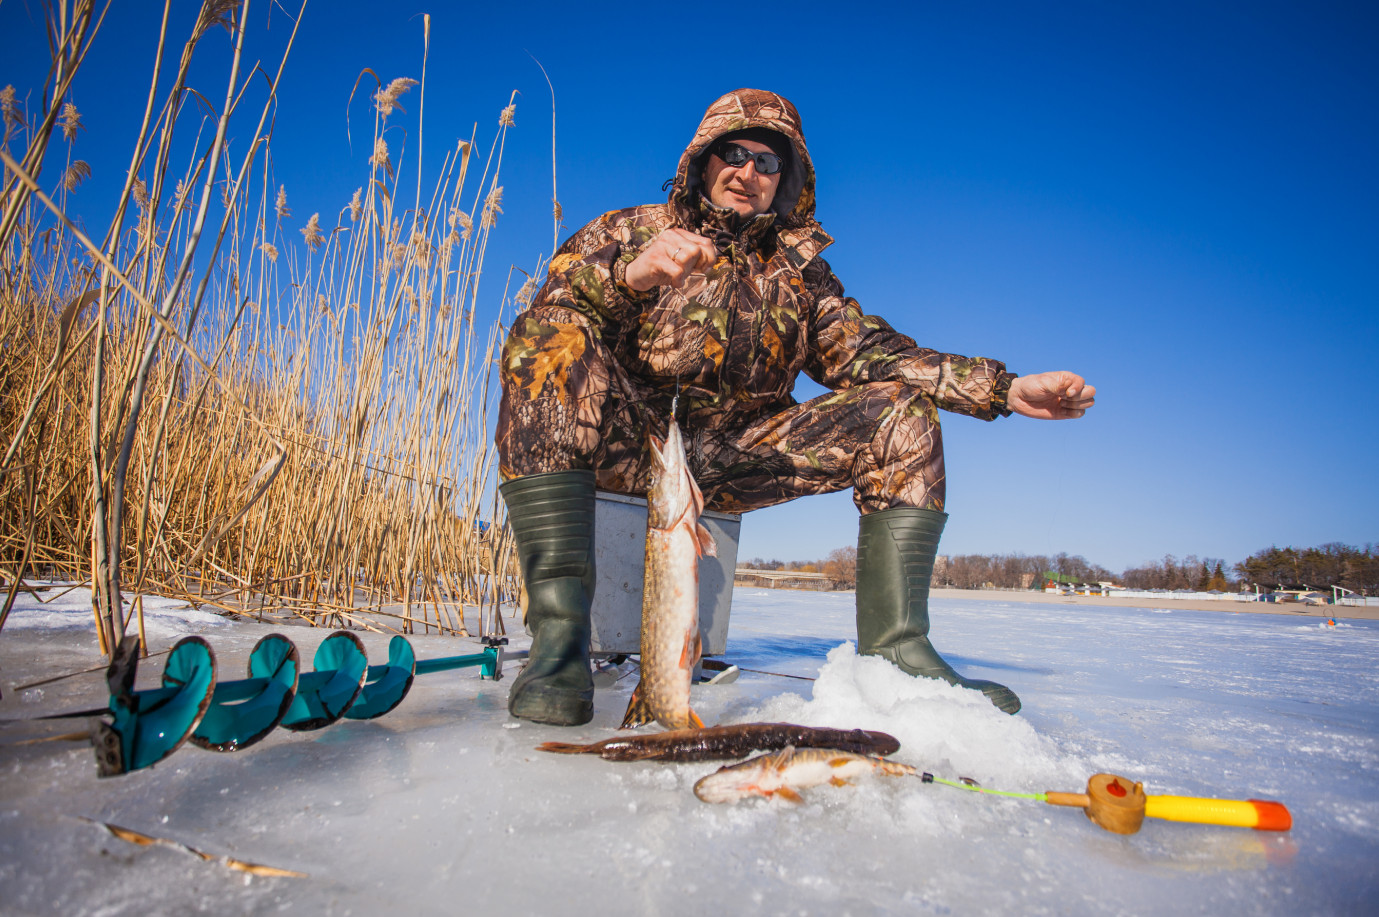 Ice Fishing: How To Stay Really Warm This Winter